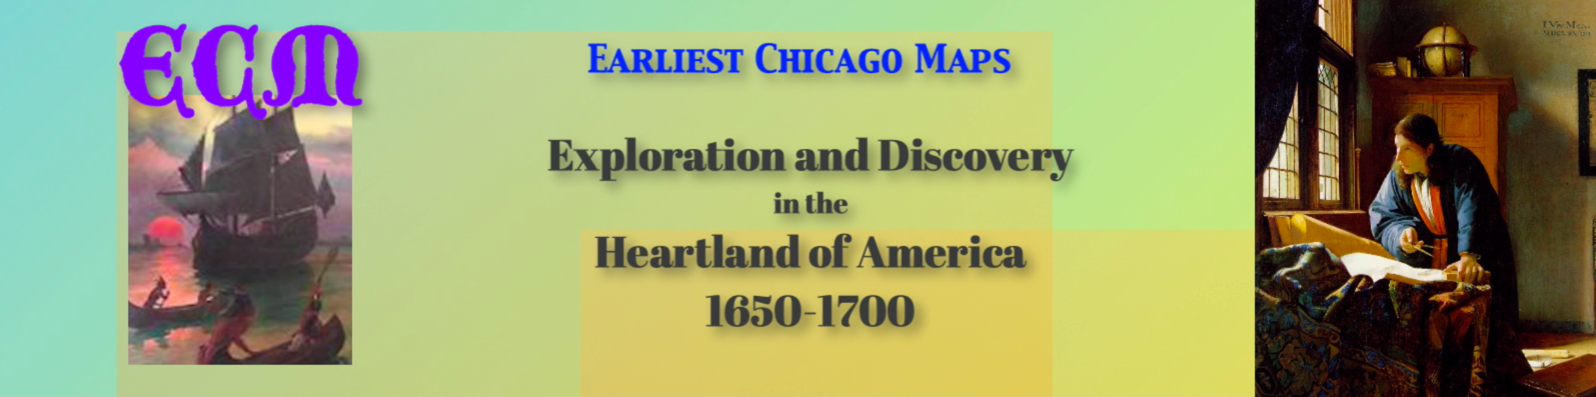 Earliest Chicago Maps